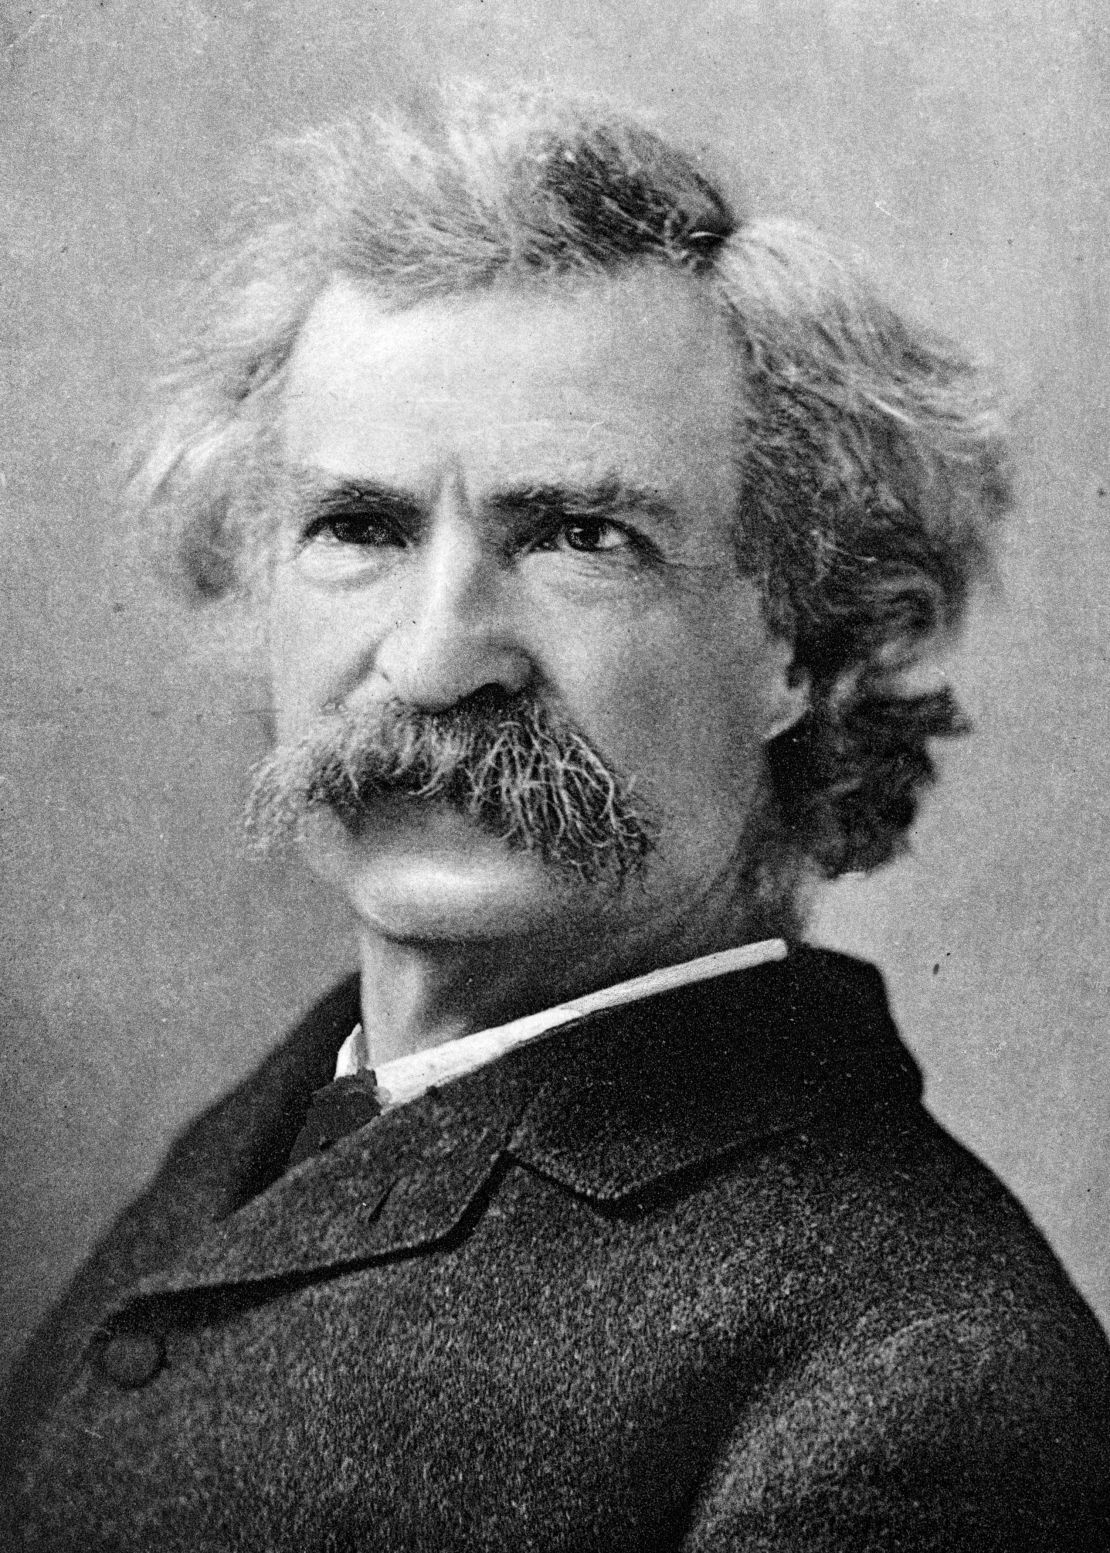 Twain: Hit the road in 1867. Still going strong.